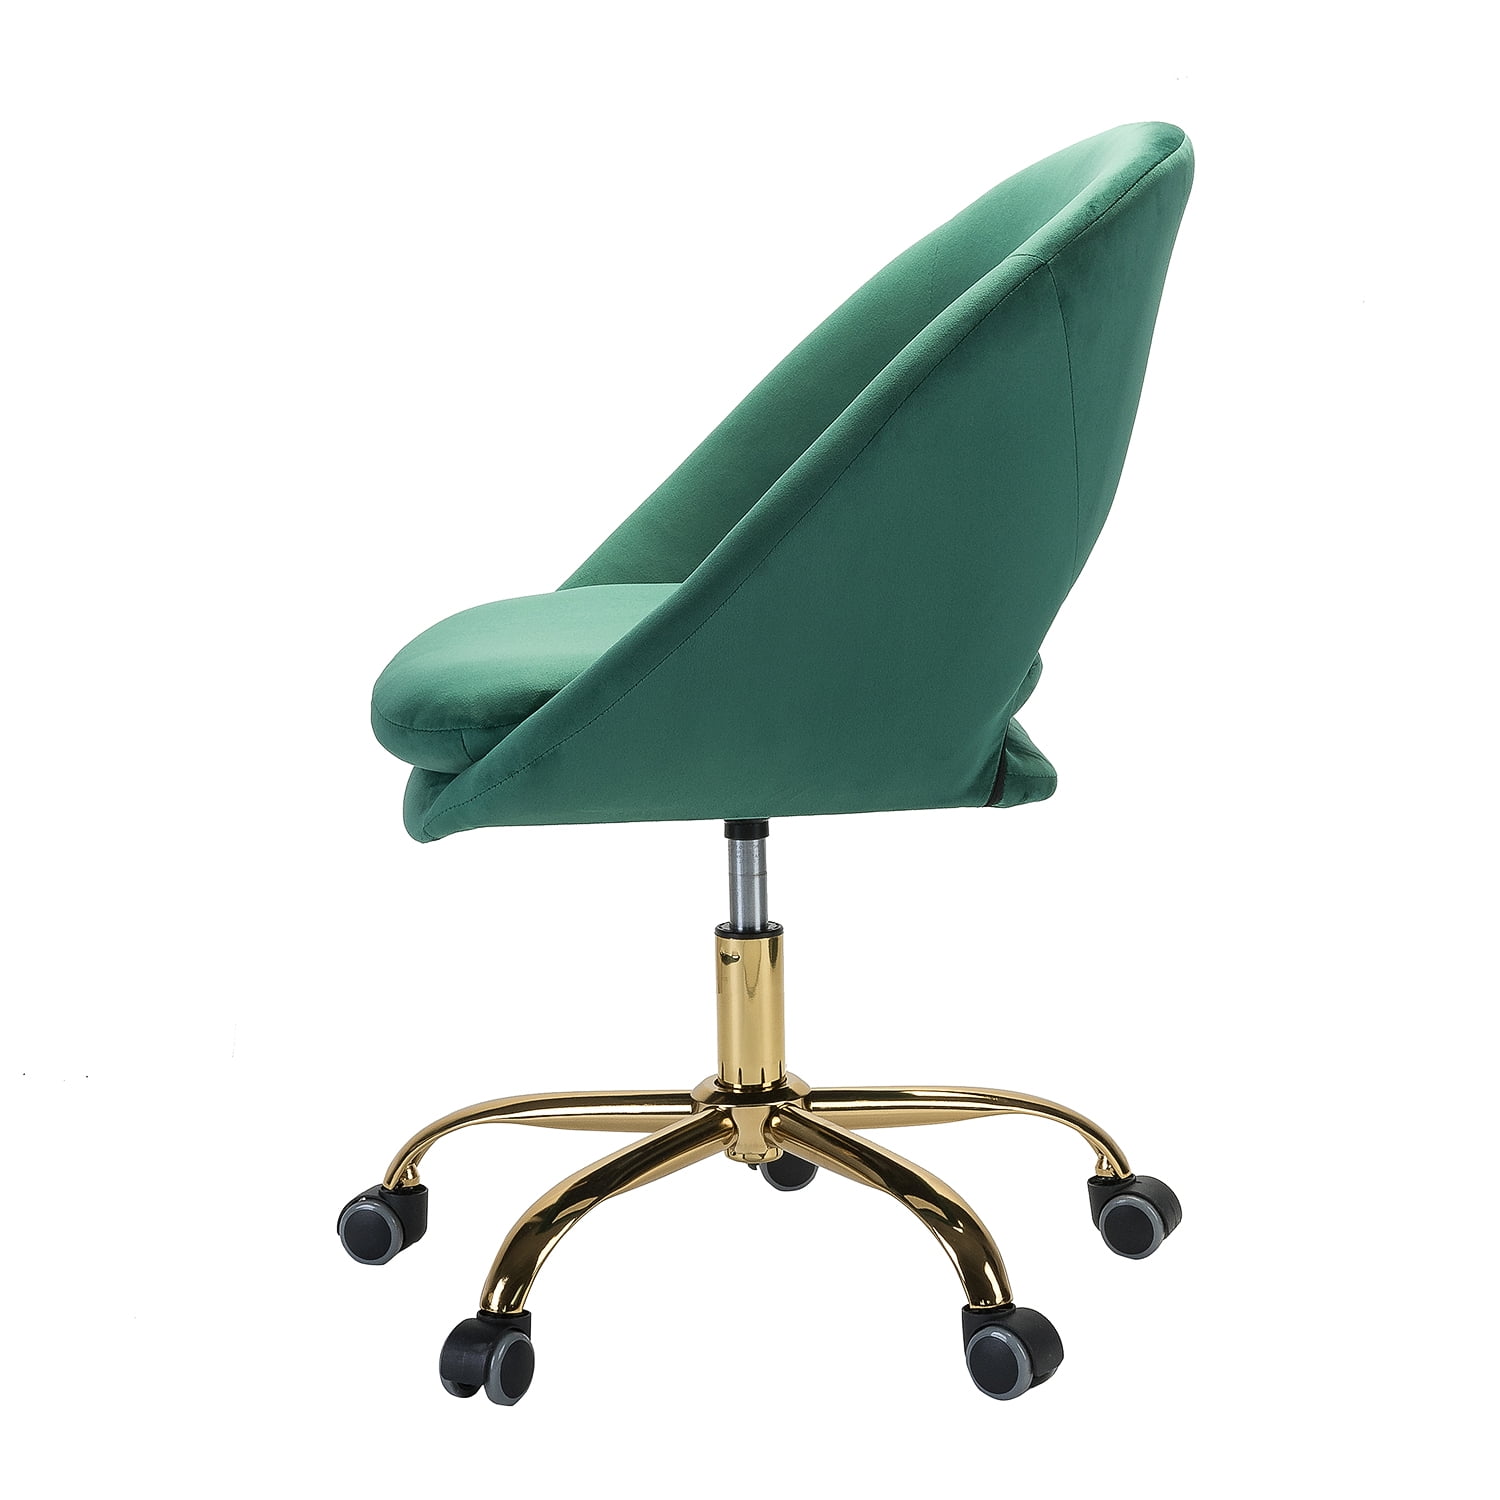 Green Metal Sewing Chairs — Weisshouse